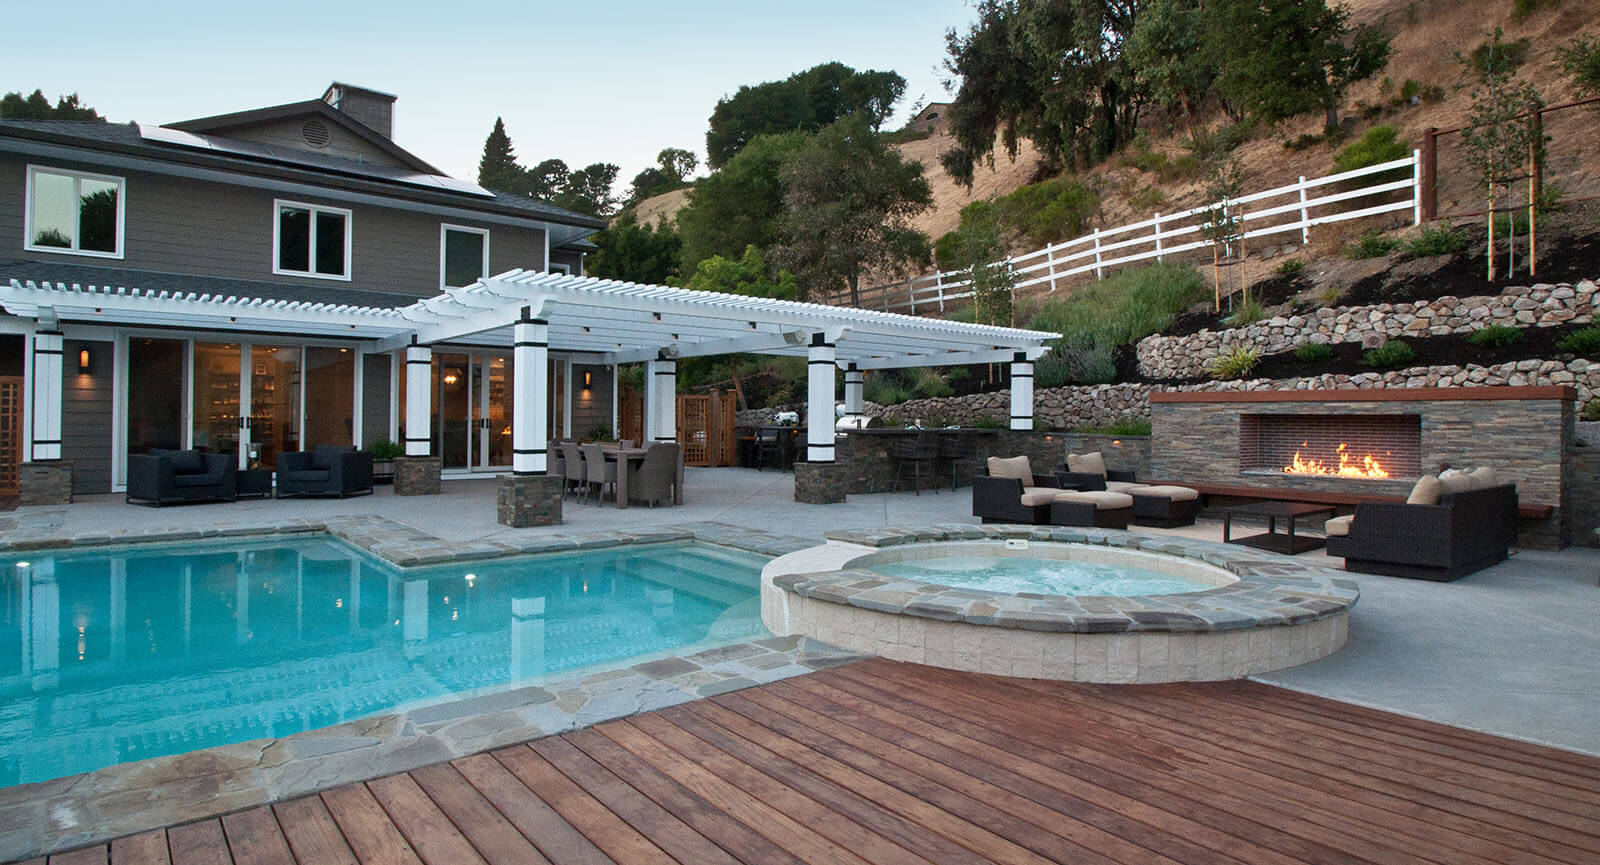 Open stone patio, half-covered by a white slatted pergola, with a nearby custom shaped aquamarine pool with elevated stone wrapped jacuzzi seating with view of broken glass fireplace, and nearby dark wood deck connecting to the pool